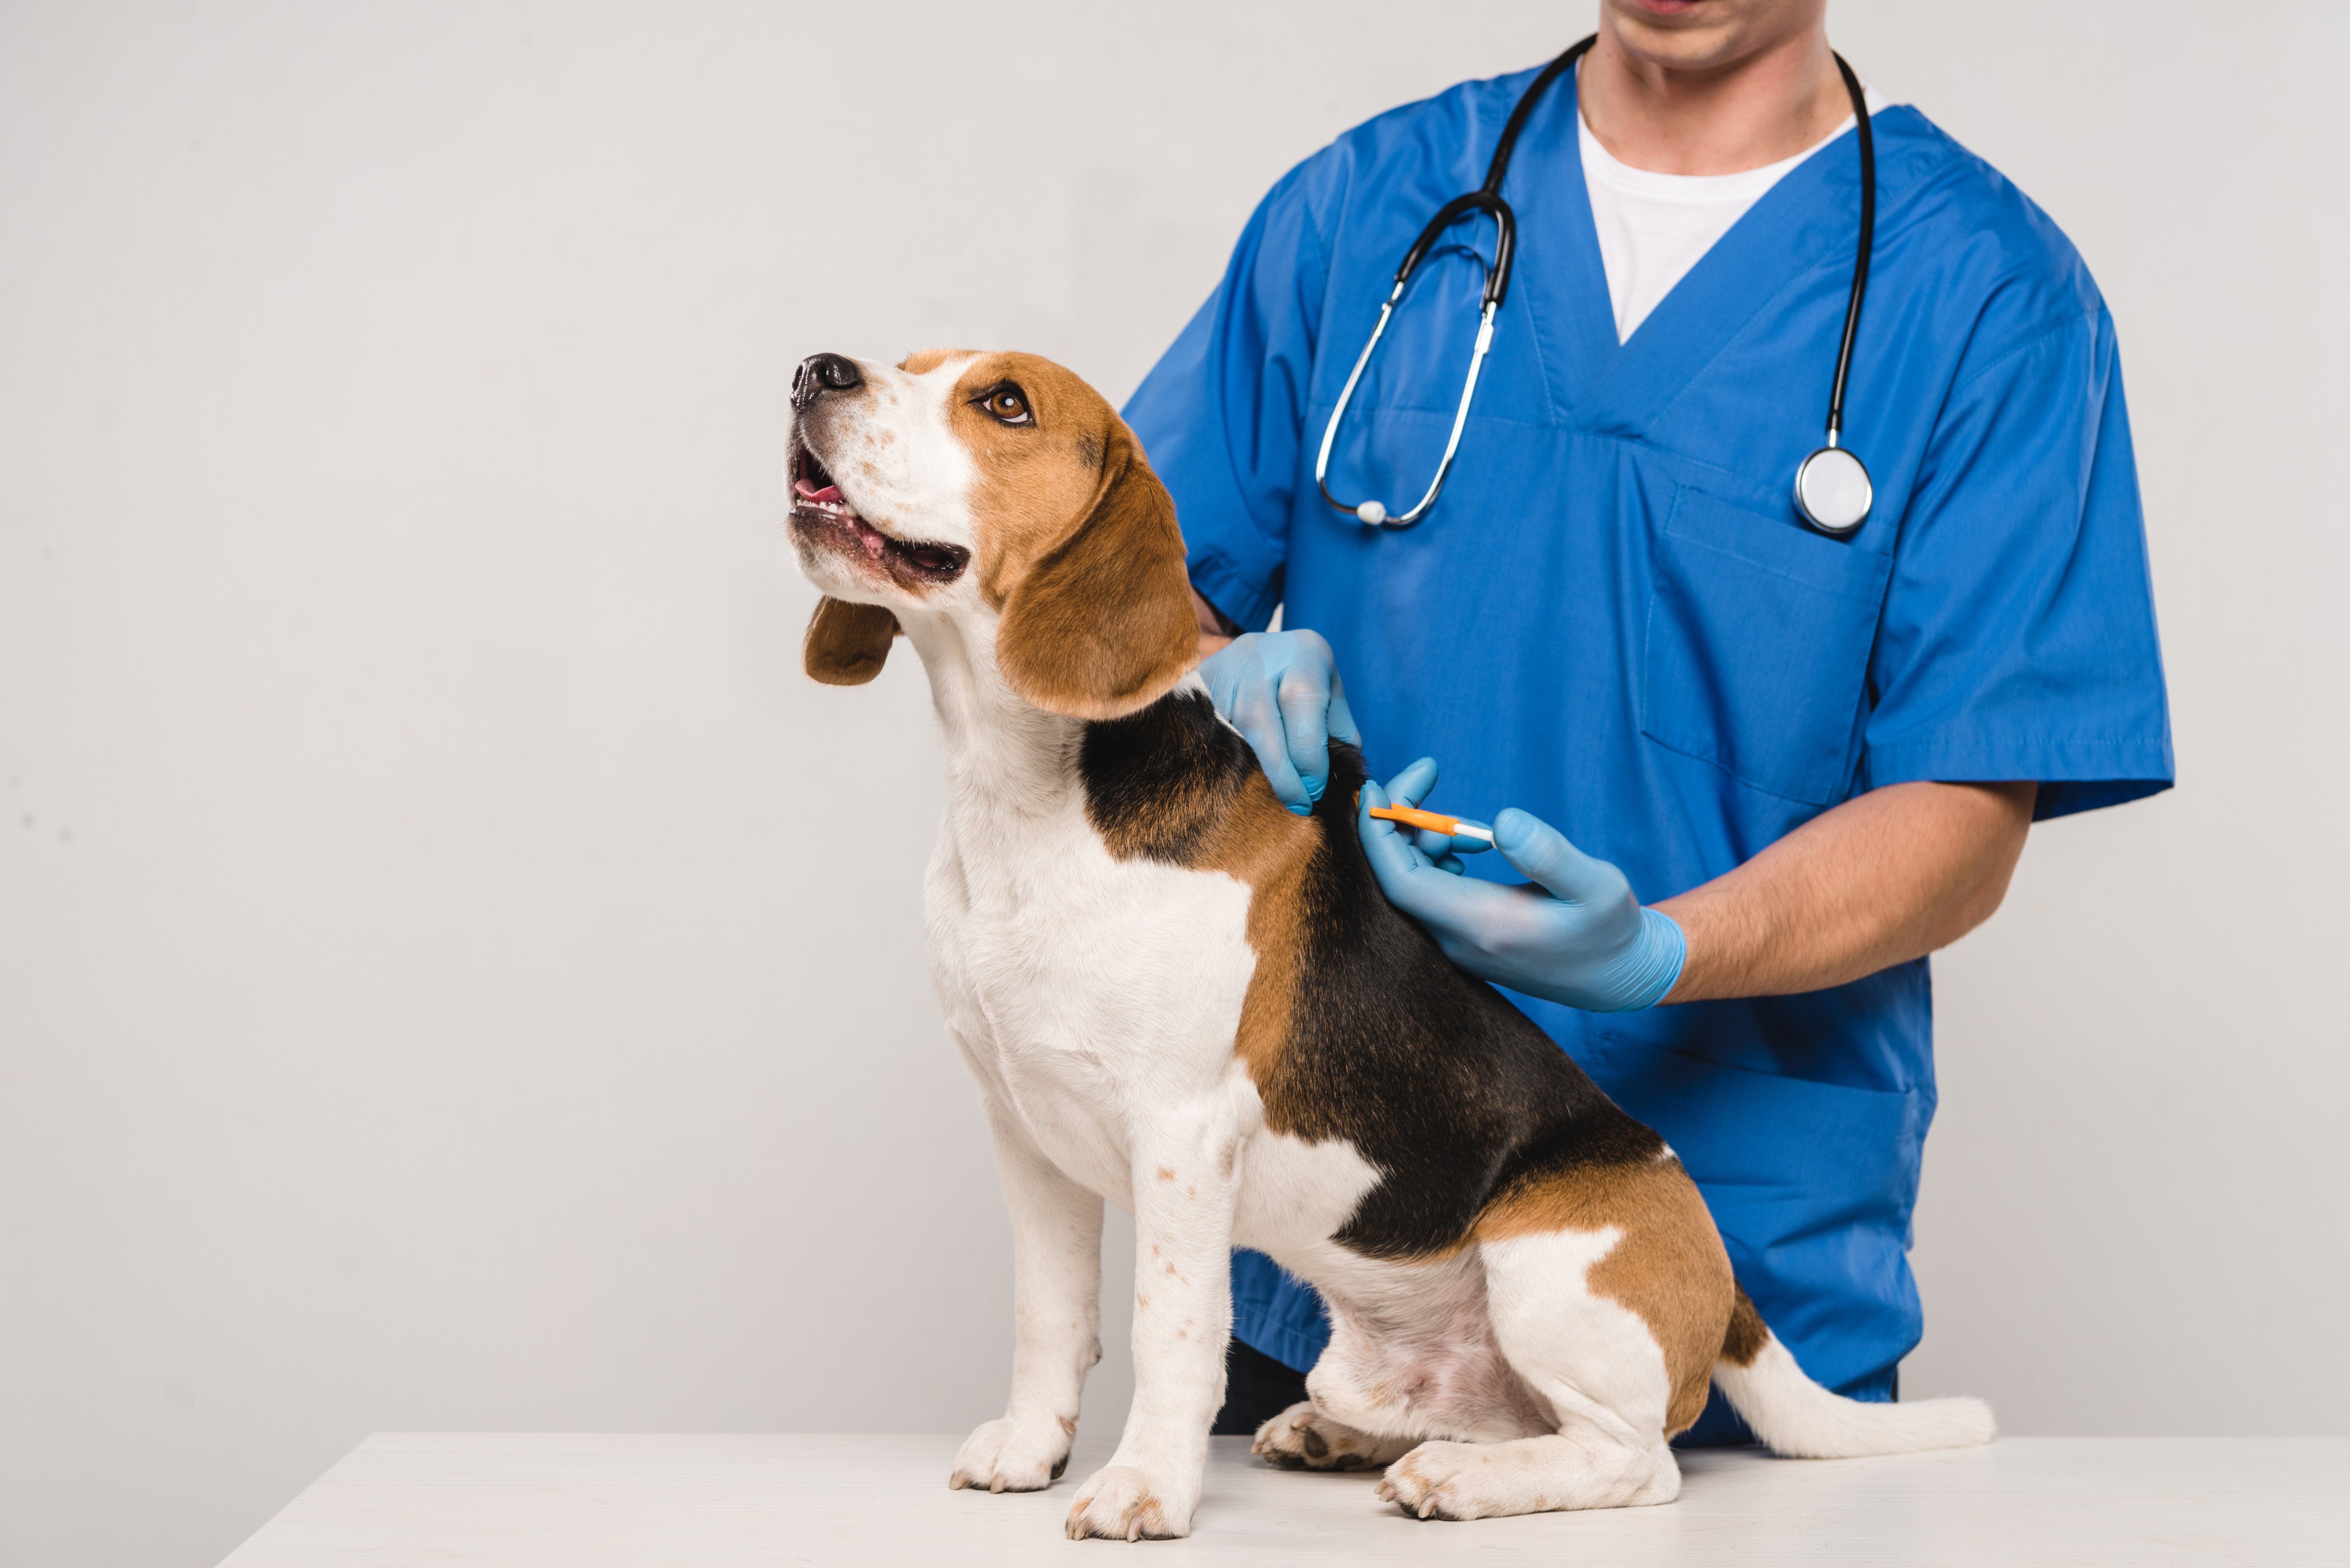 Why Is It Important to Microchip Your Pet?